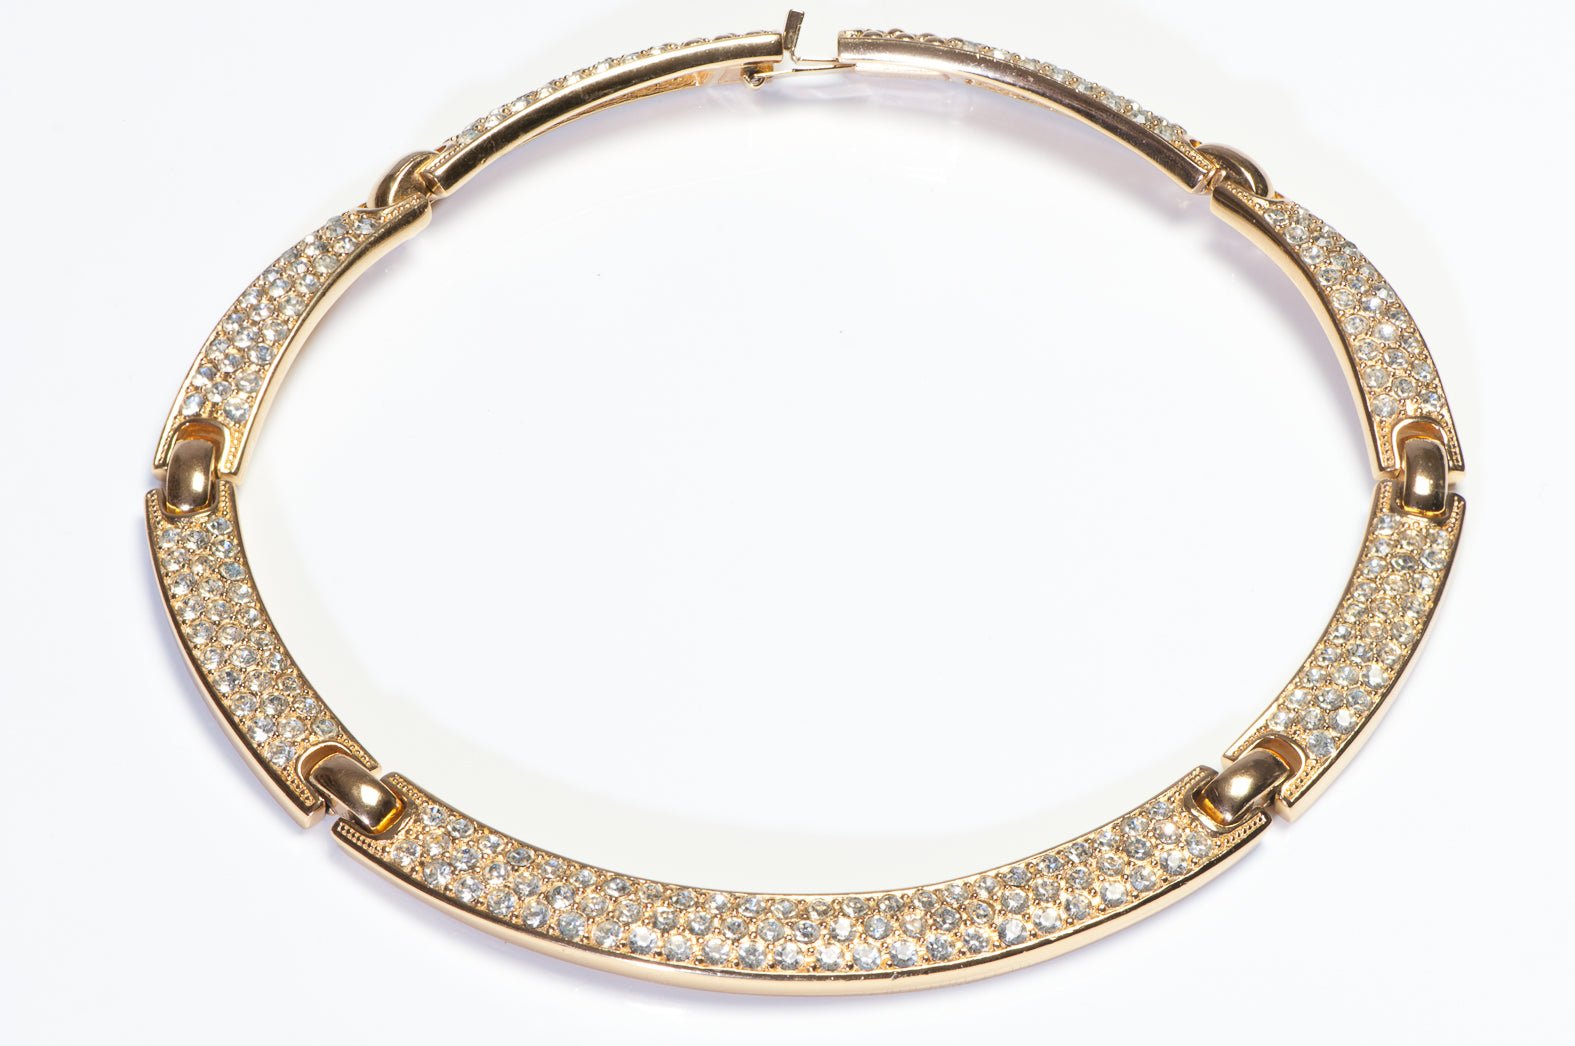 Vintage Christian Dior Paris Gold Plated Crystal Collar Necklace